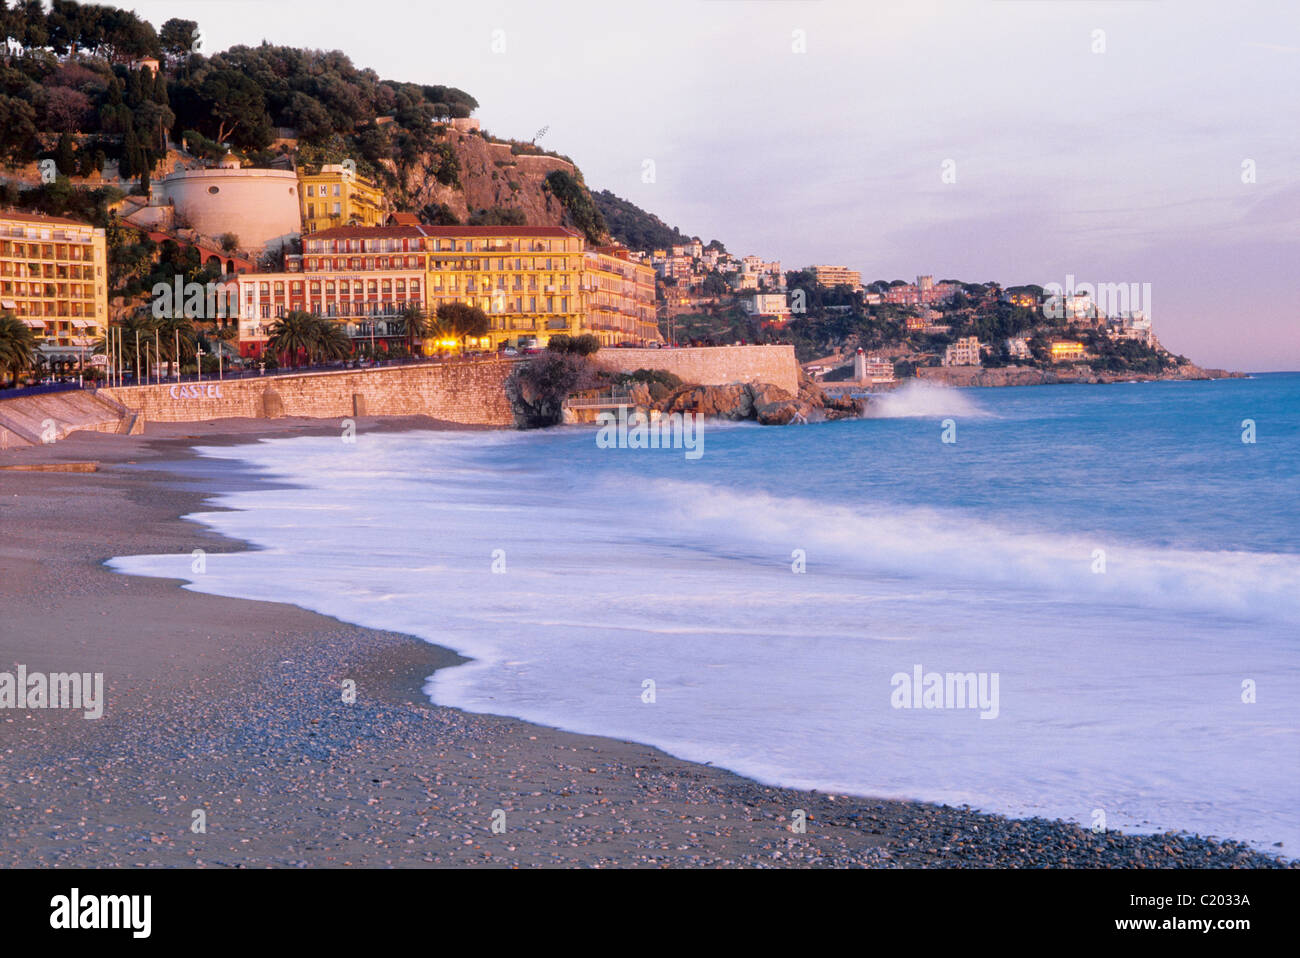 The 'Ponchettes' beach of Nice near the old town Stock Photo